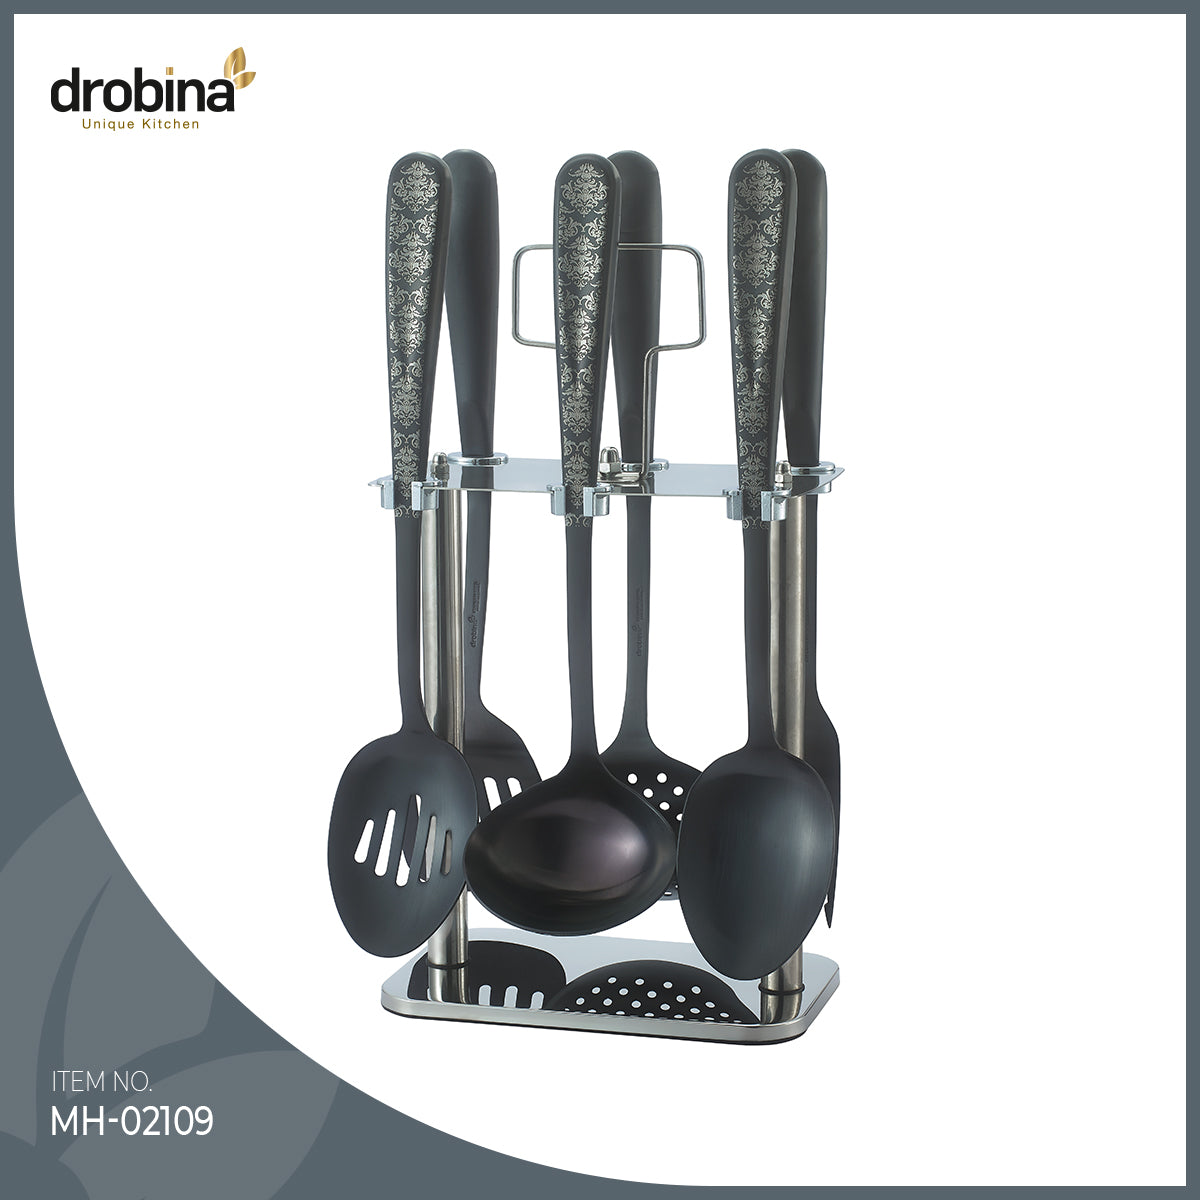 Drobina Set of 7-piece - MH-02109 Stainless Utensils